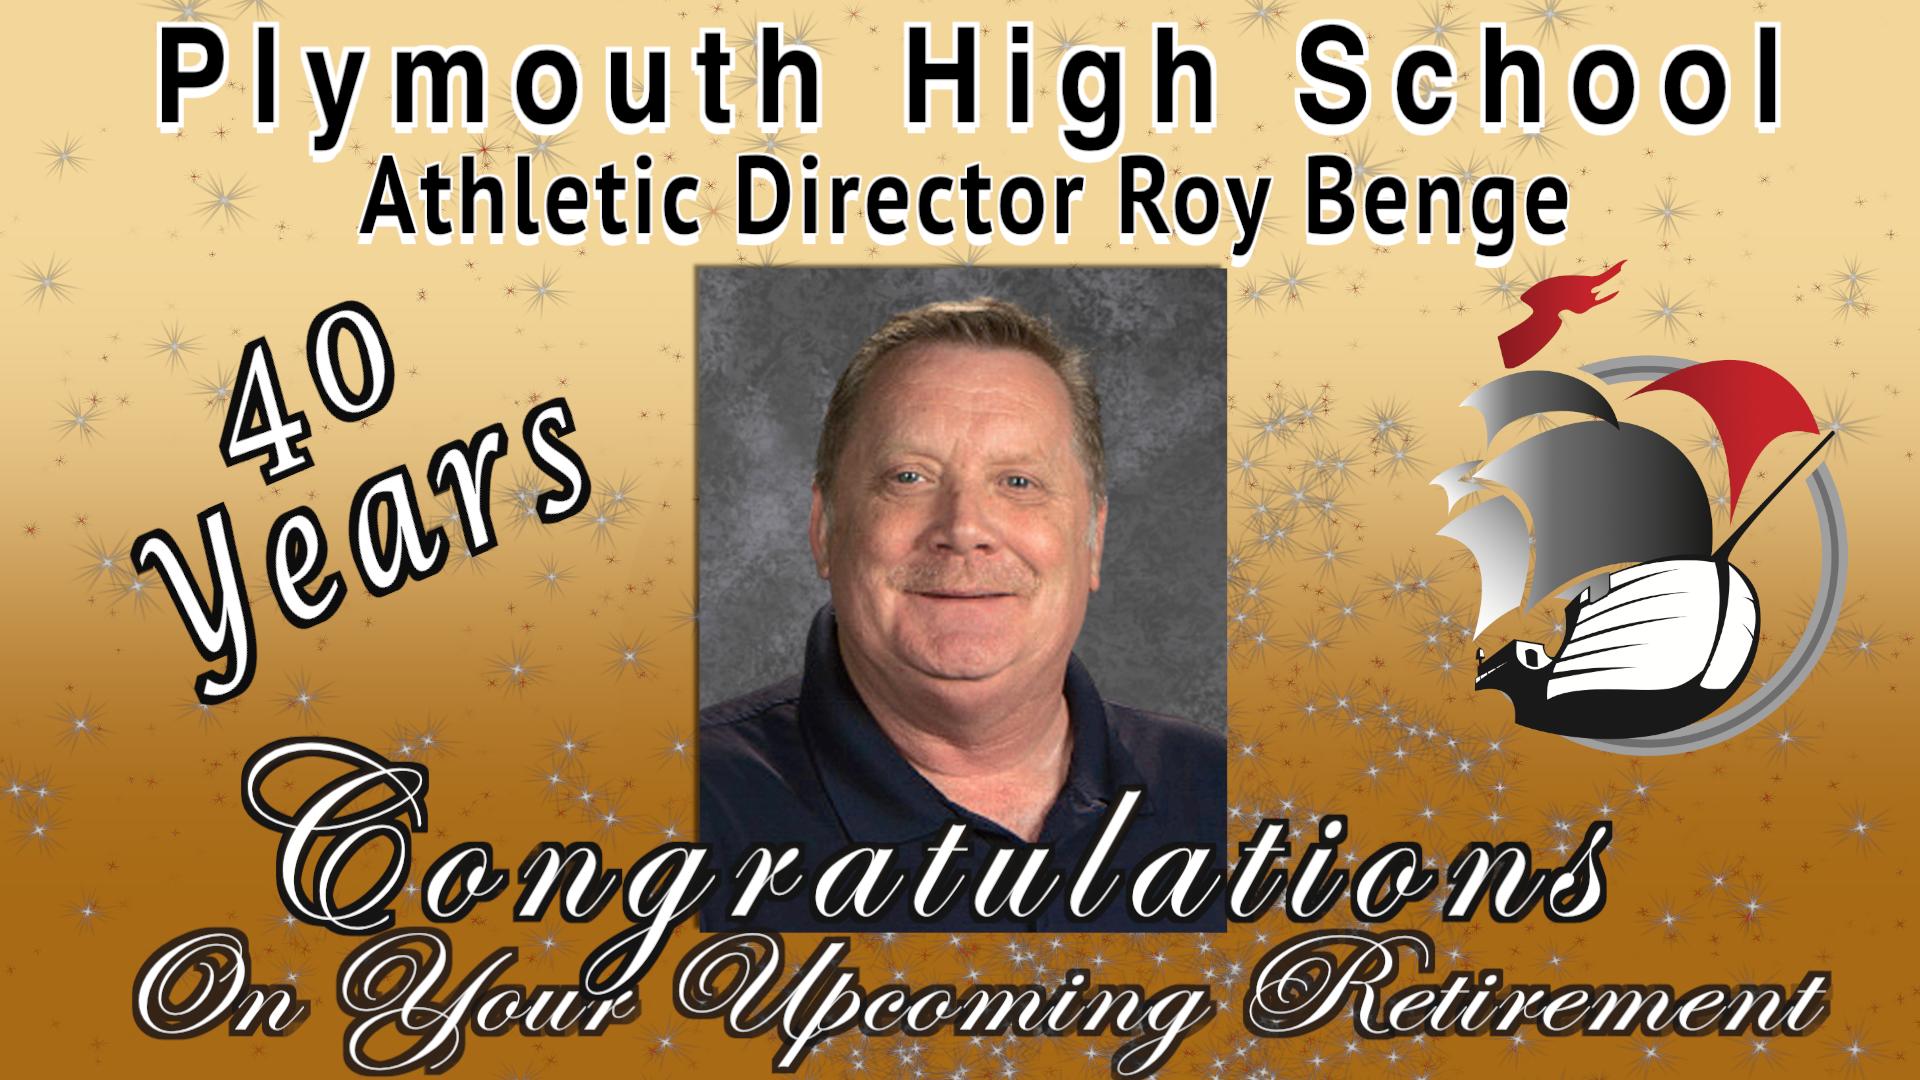 Plymouth High School Athletic Director Roy Benge 40 years Congratulations on your upcoming retirement. Roy Benge picture and PHS Ship Logo